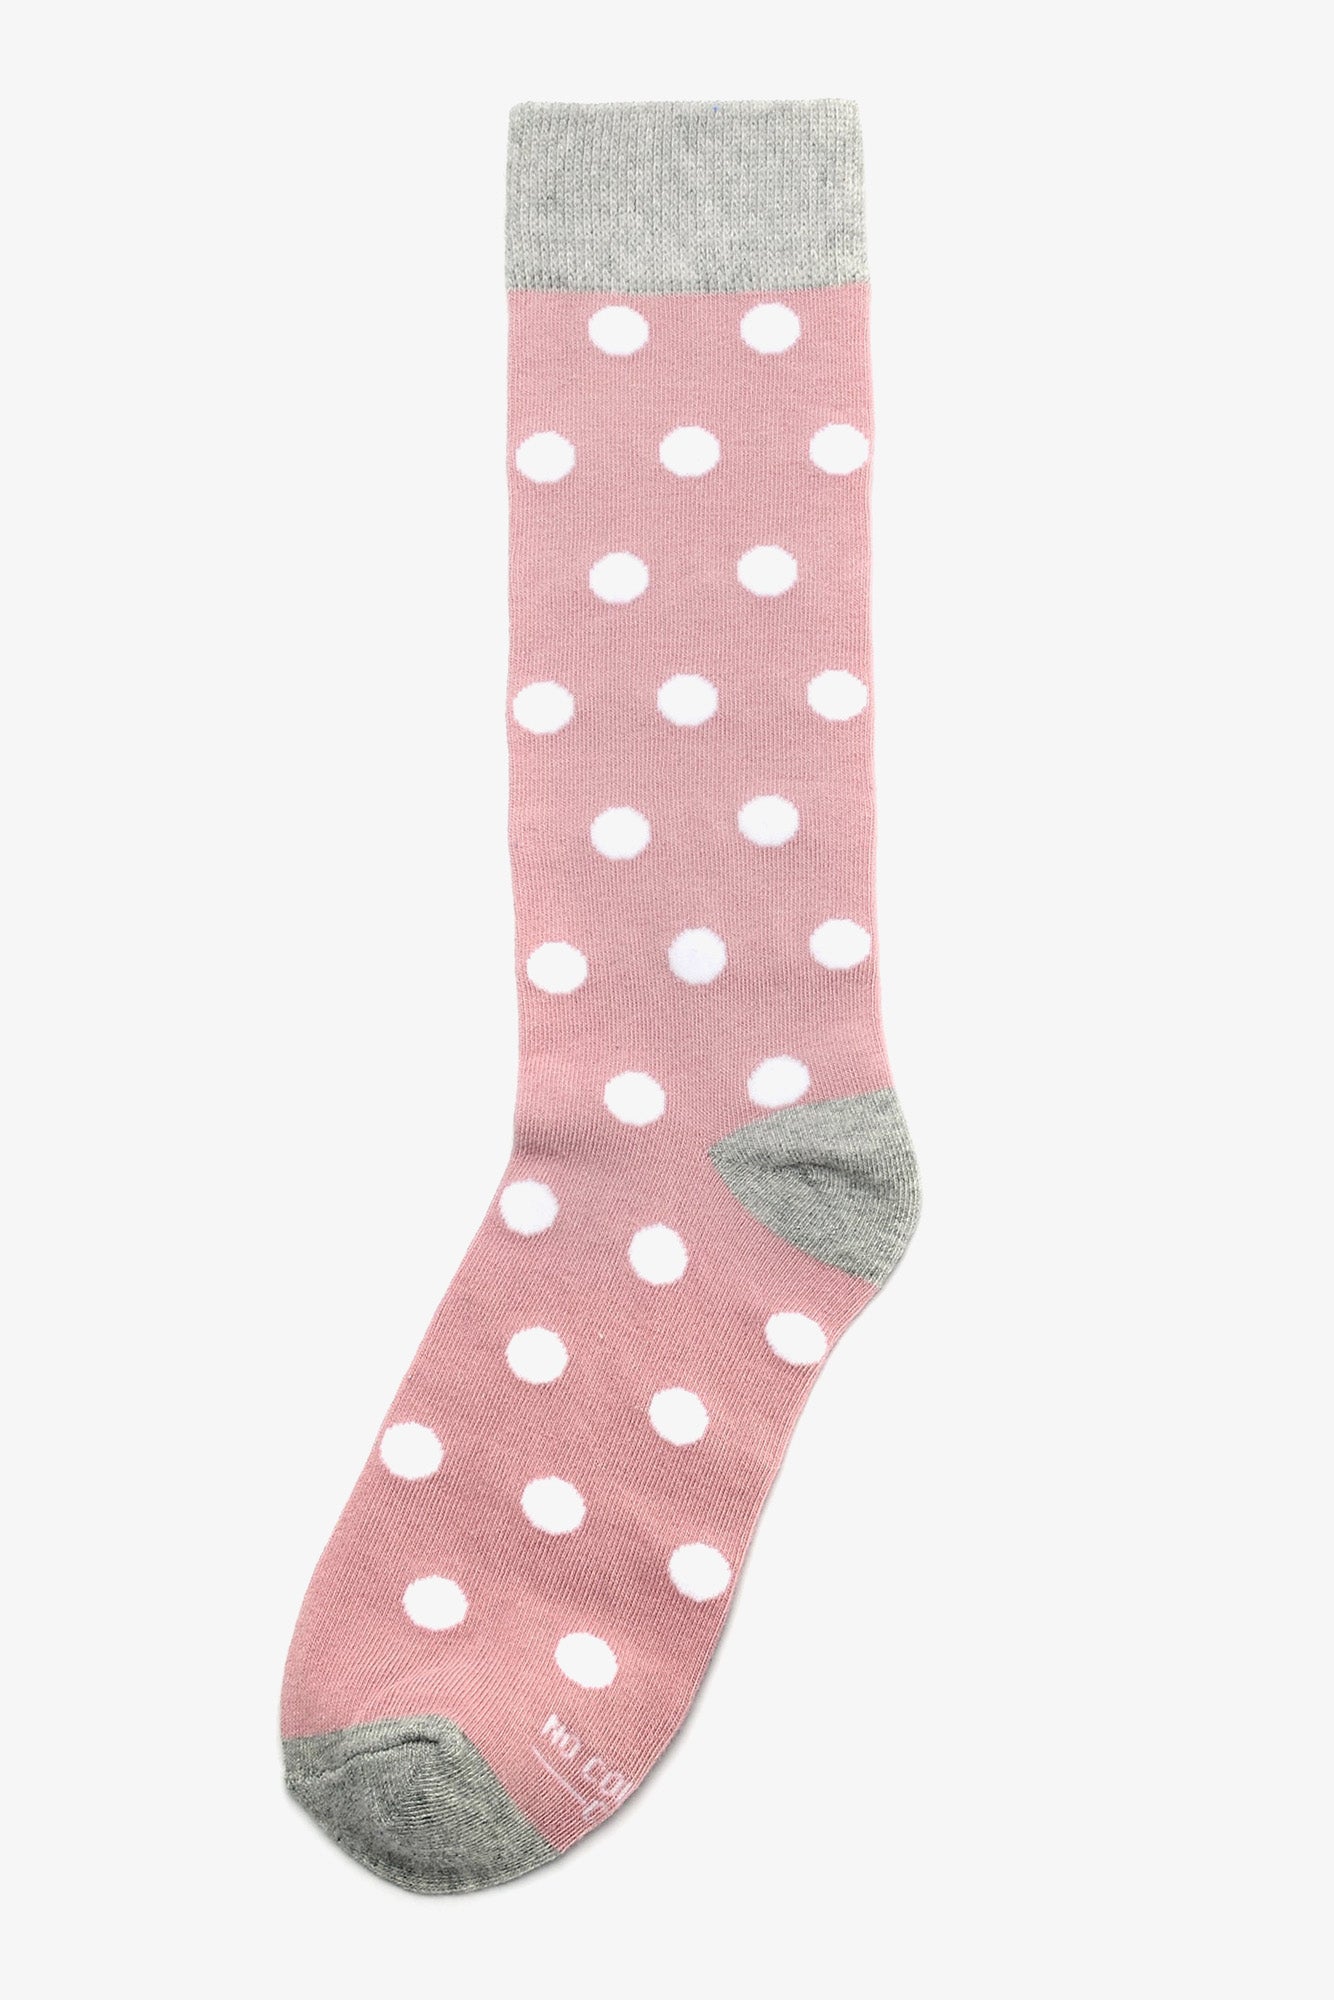 Dusty Rose with White Polka Dot Groomsmen Socks by No Cold Feet